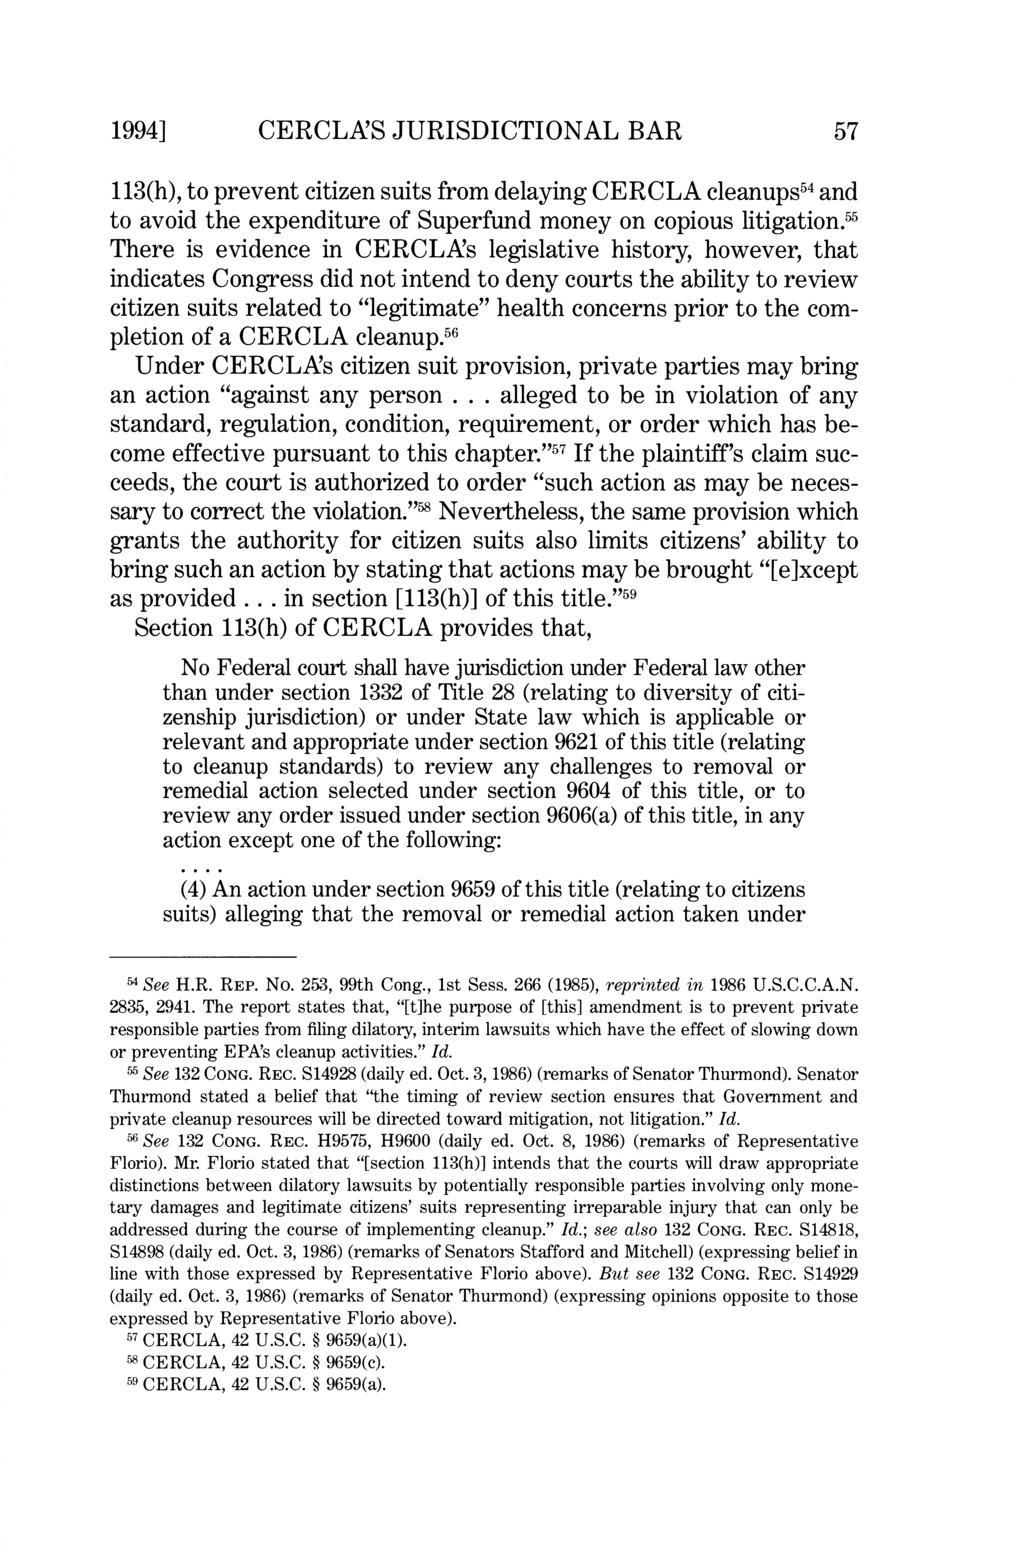 1994] CERCLNS JURISDICTIONAL BAR 57 113(h), to prevent citizen suits from delaying CERCLA cleanups54 and to avoid the expenditure of Superfund money on copious litigation.